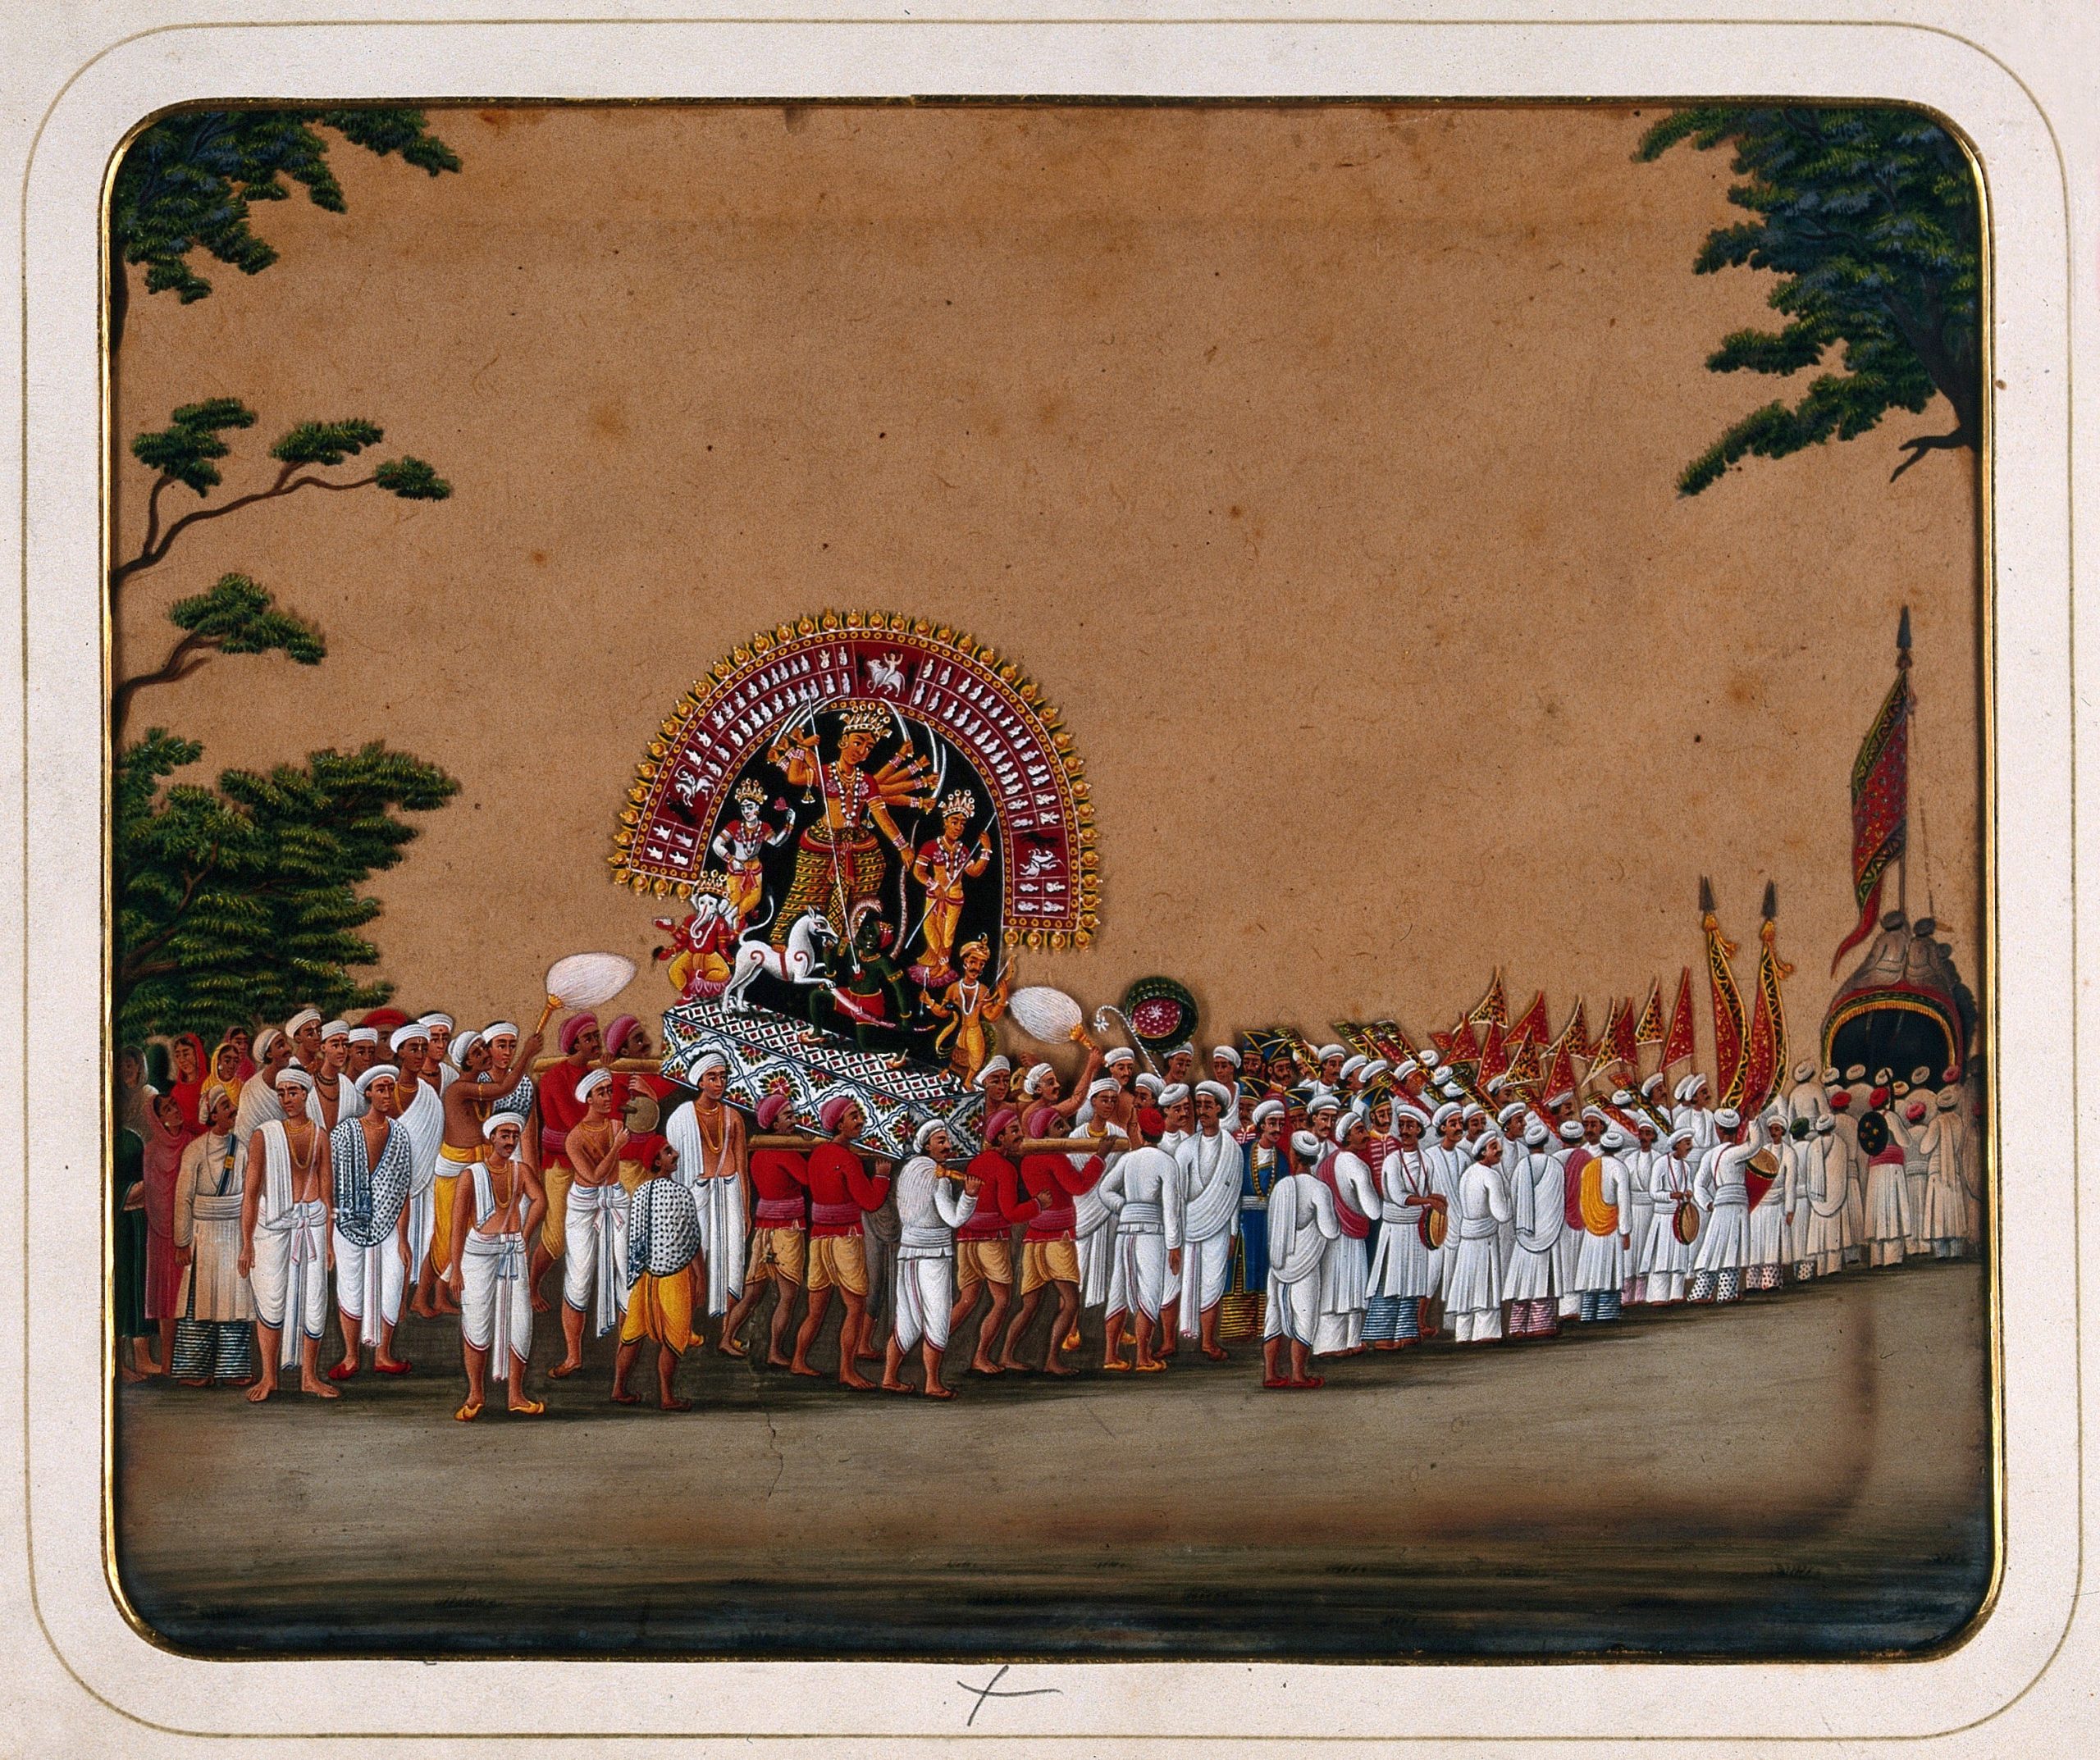 Durga Puja: a procession carrying an idol of Durga to honour her victory over evil, 19th century in A Collection of Indian costumes, types and occupations, gouache on mica (Wellcome Library, CC BY 4.0)